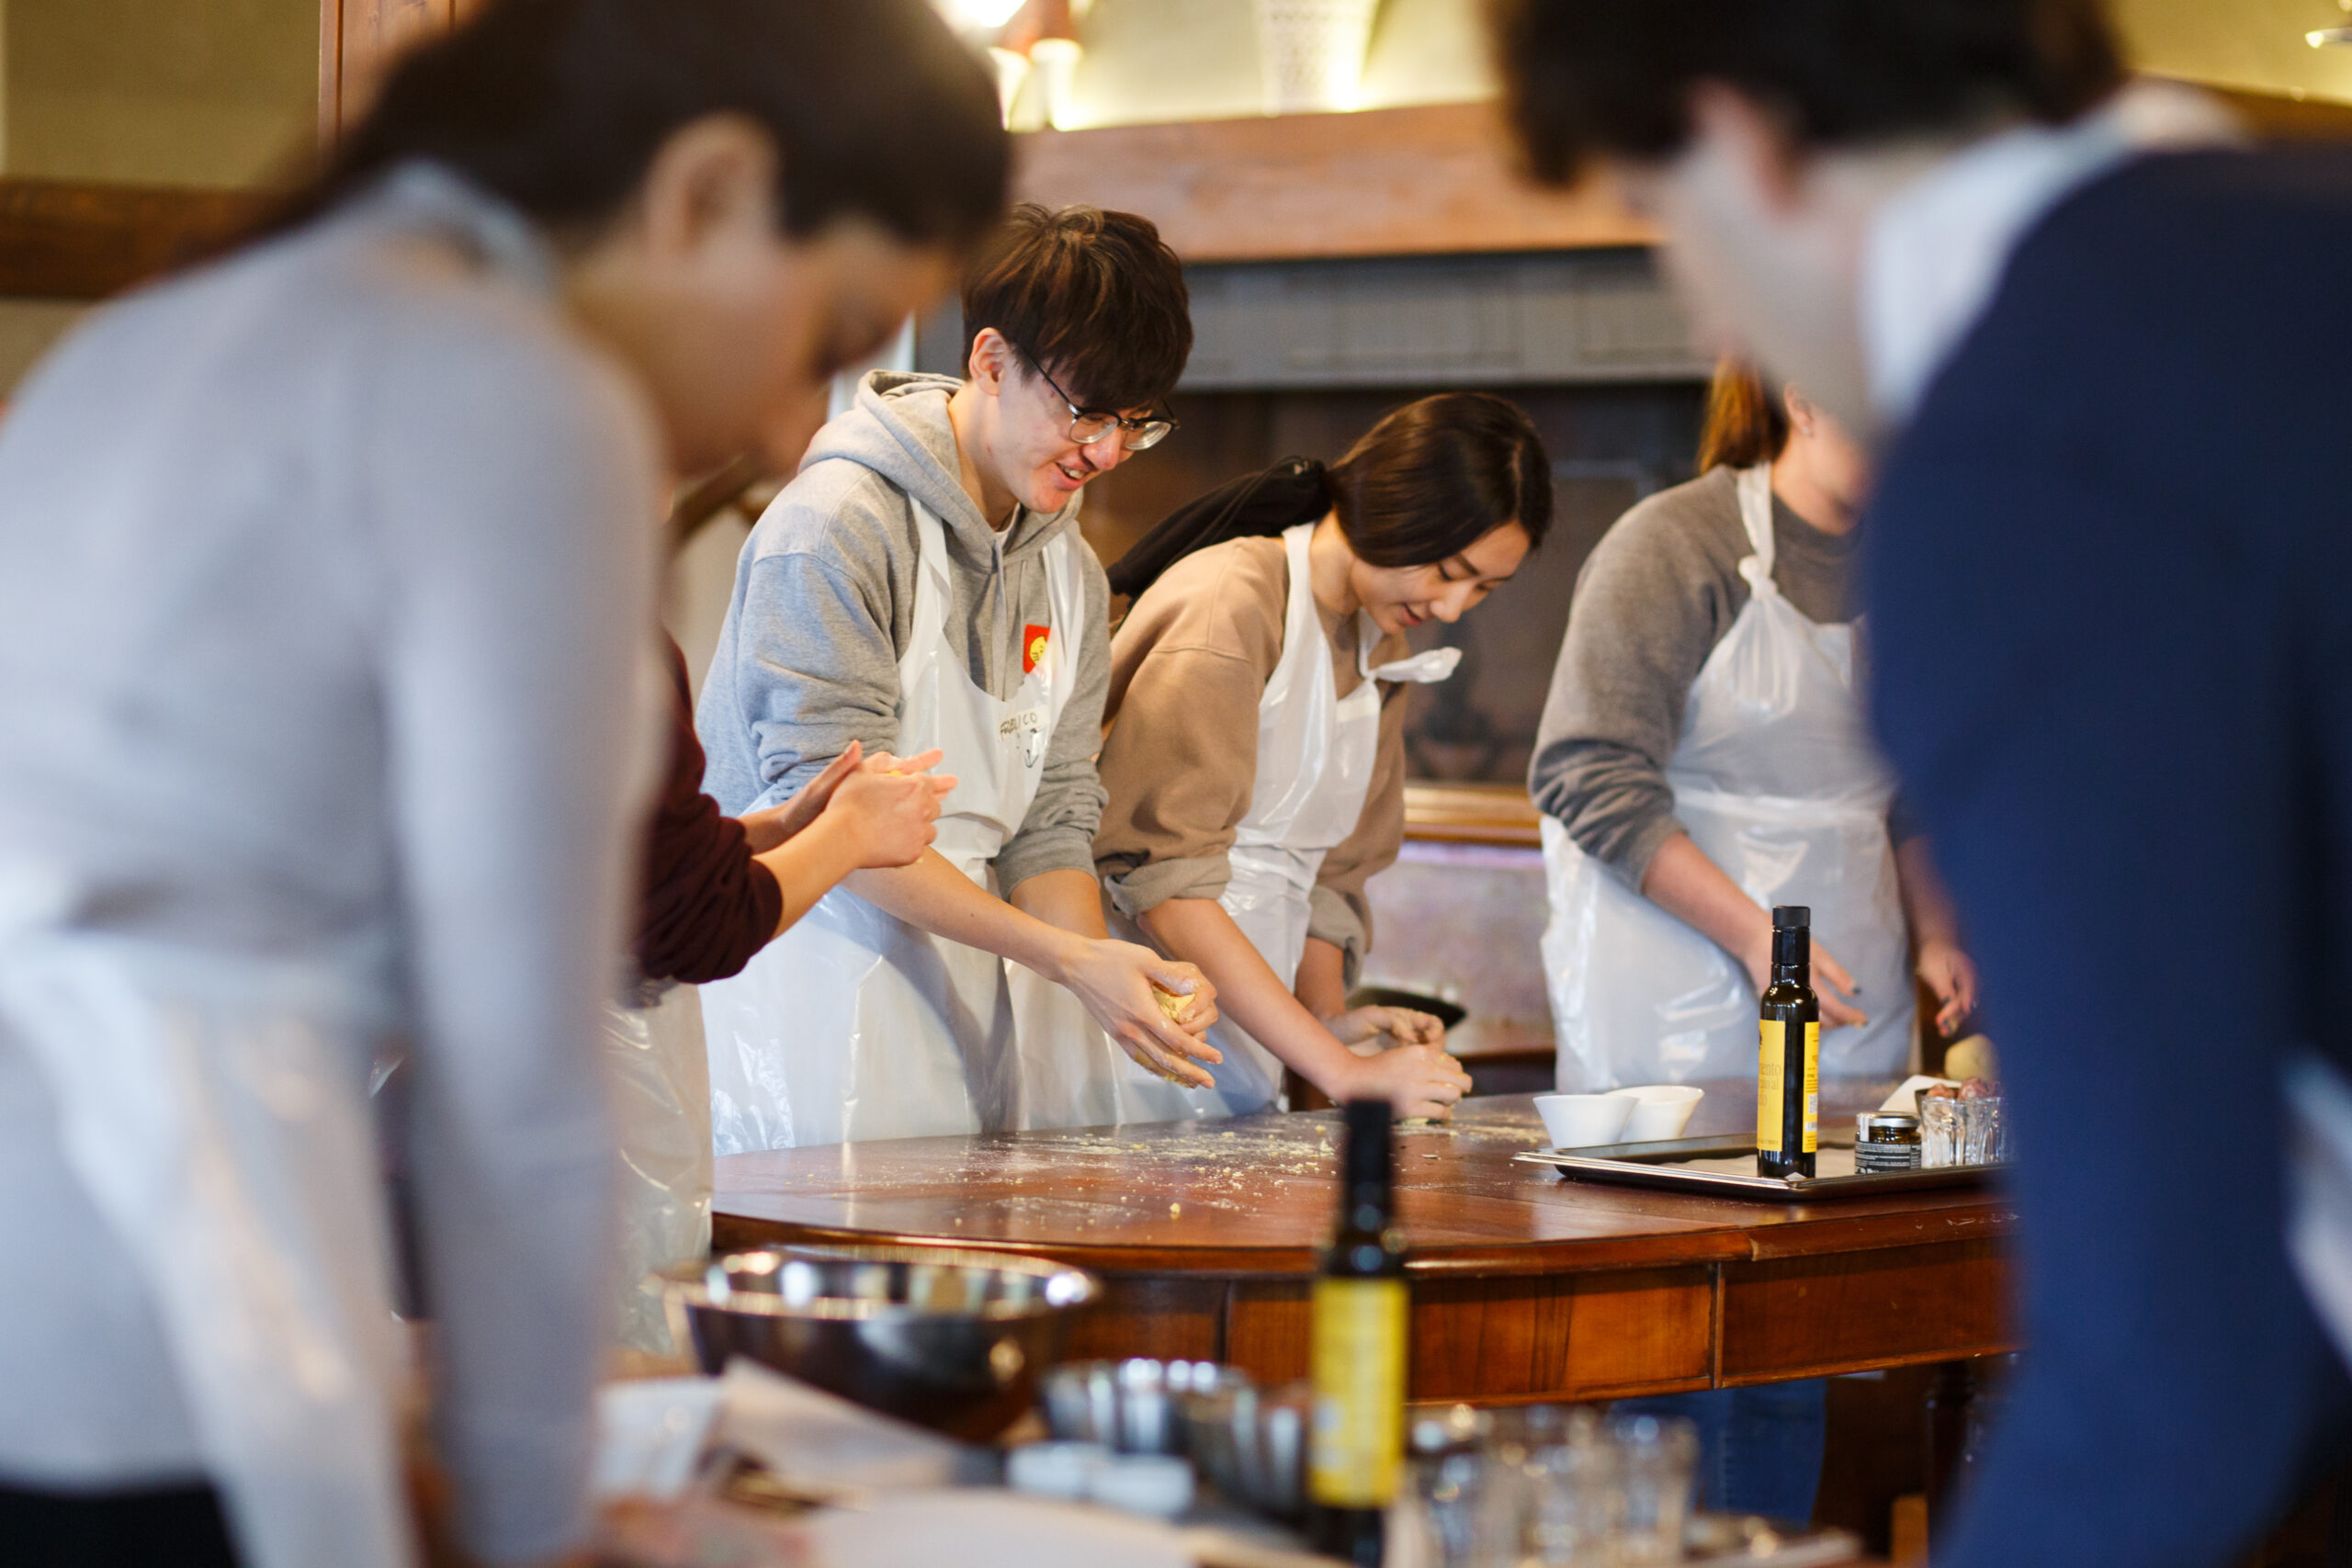 A group of student preparing food in a cooking class.